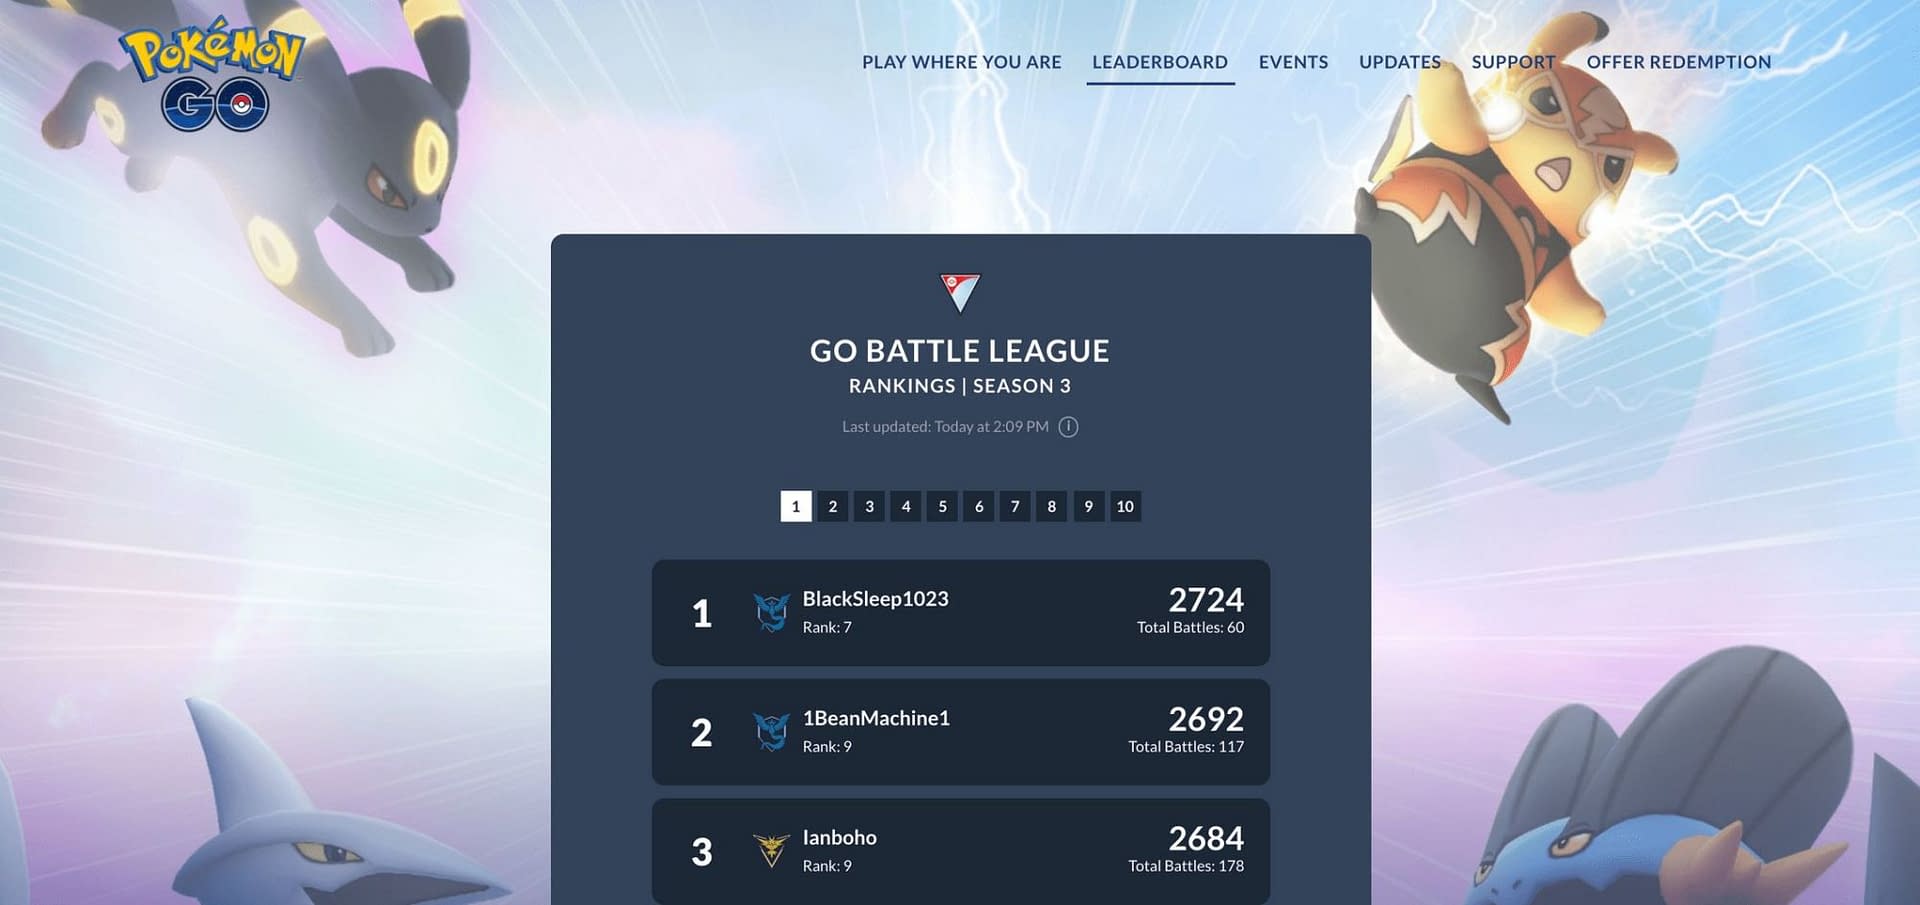 The Pokémon GO Battle League Leaderboard Shows No One At